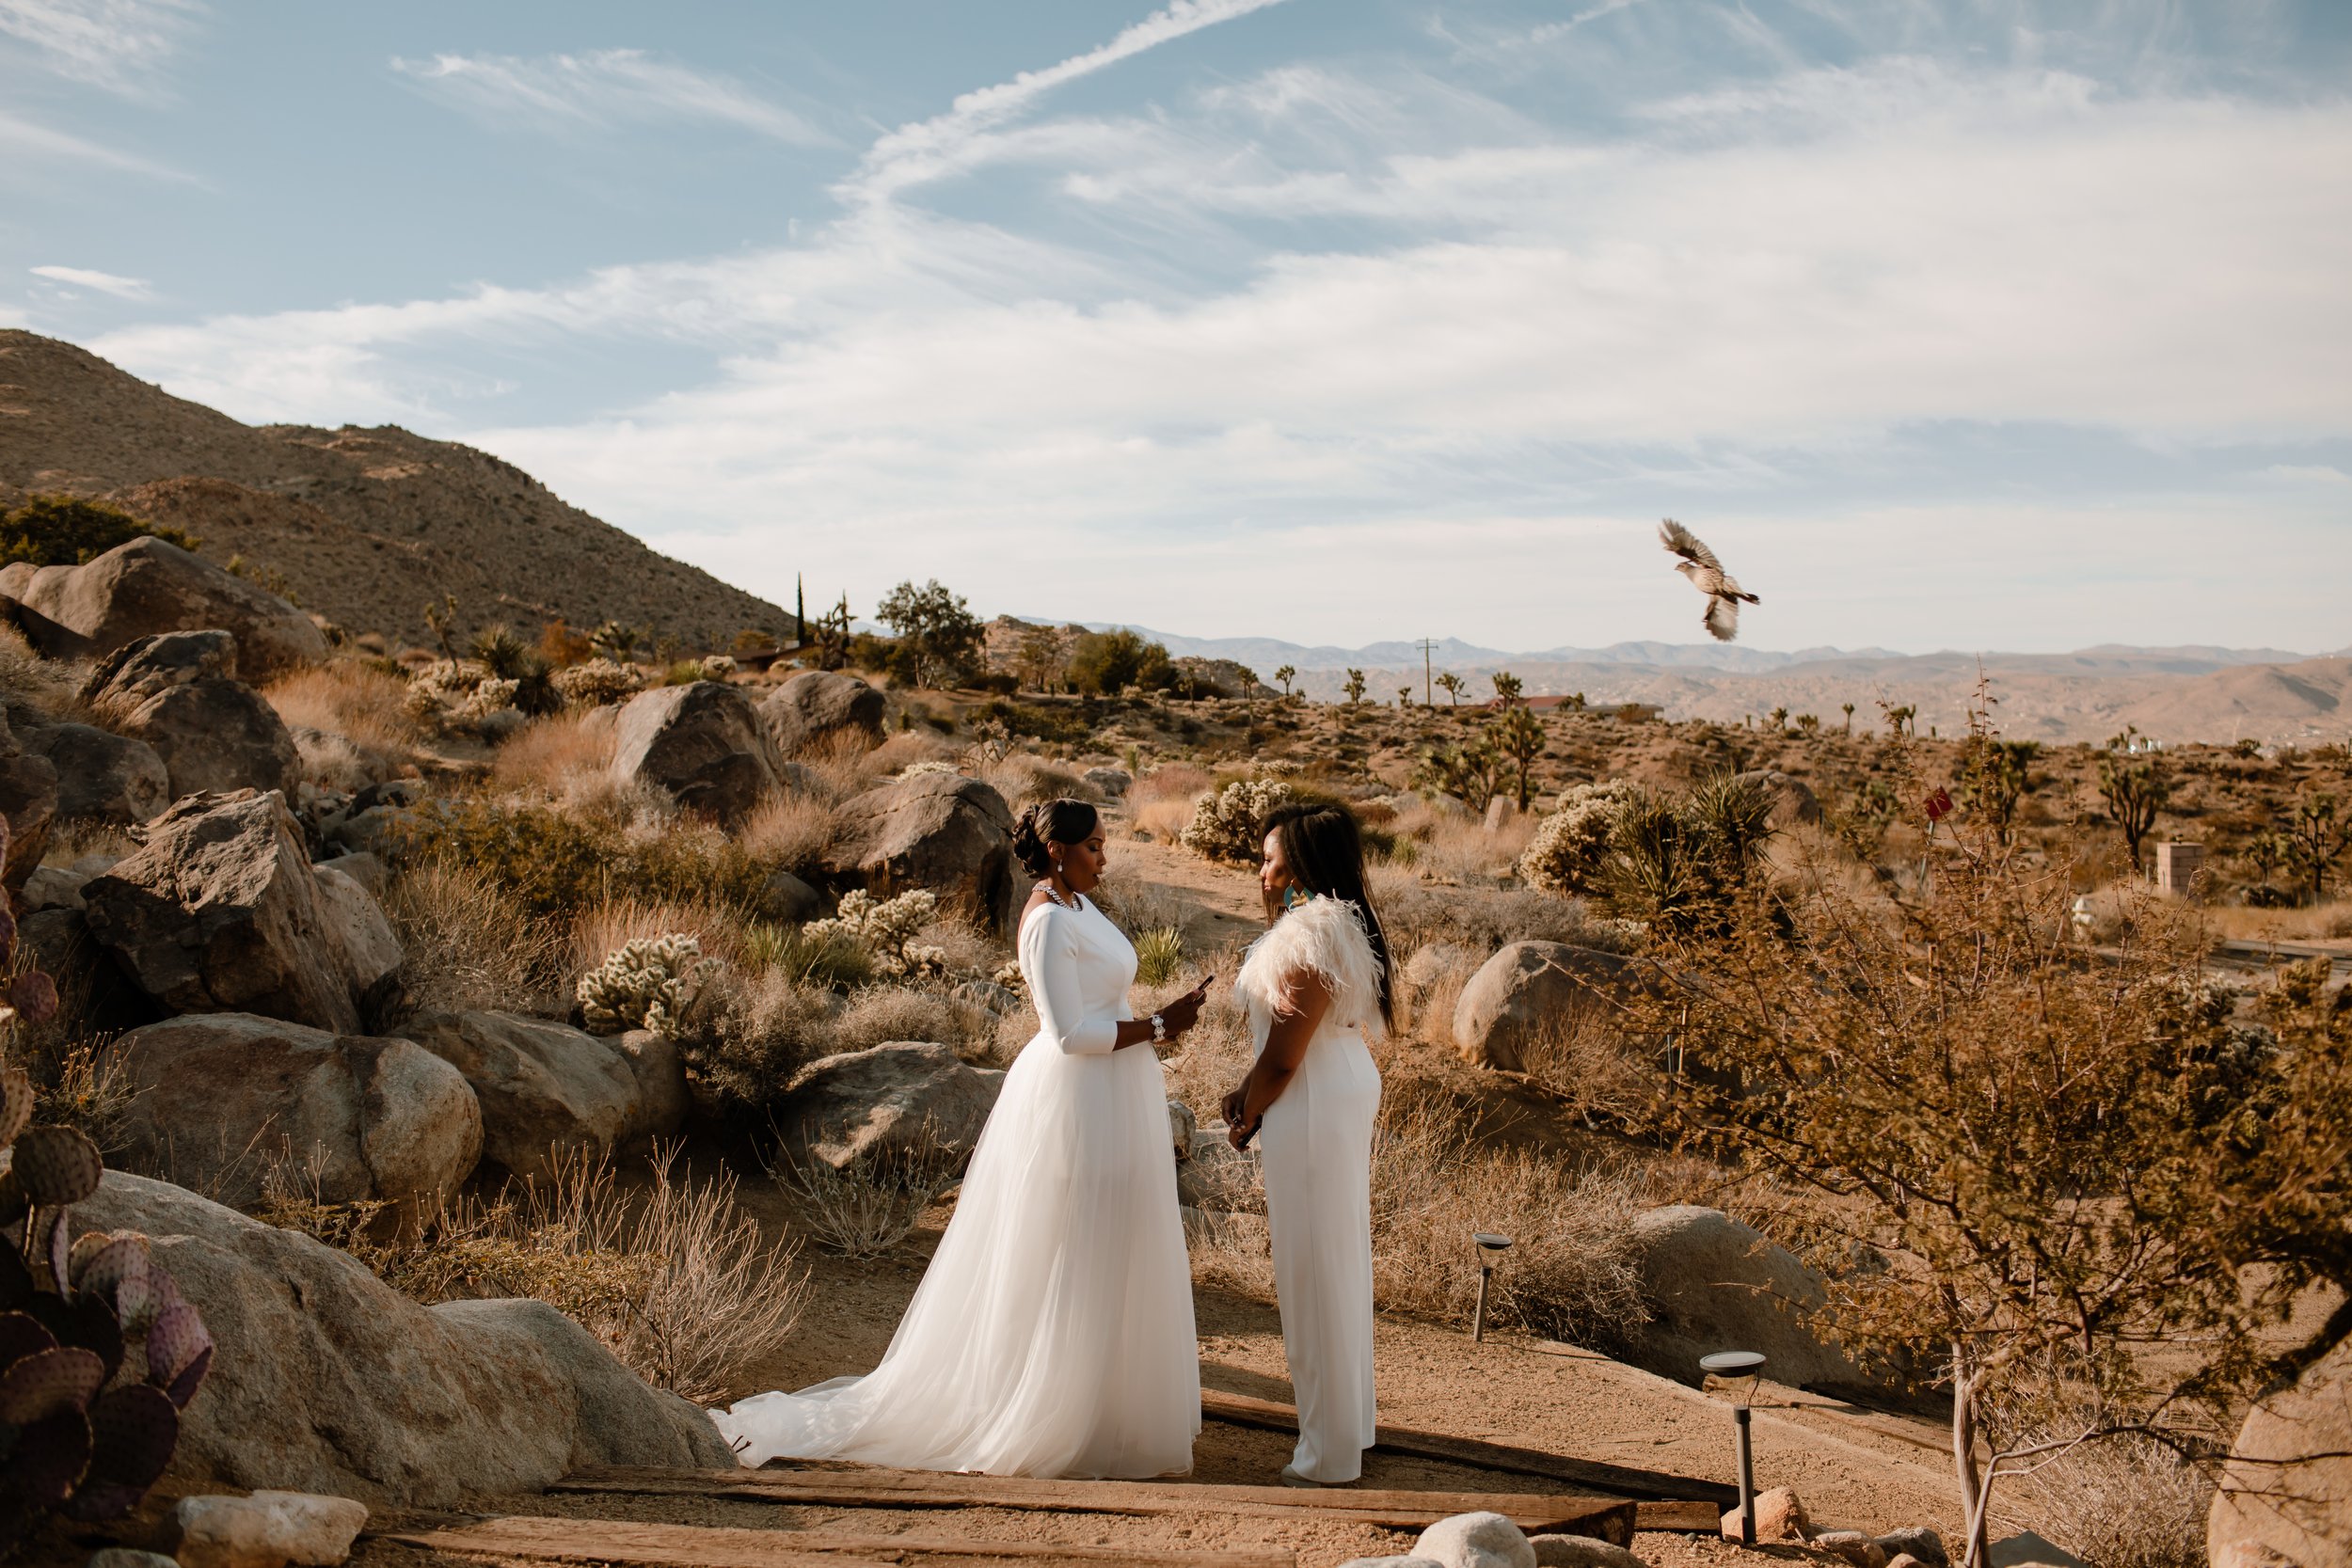  LaFawn and Sherise Elopement in Joshua Tree, CA - Eve Rox Photography 